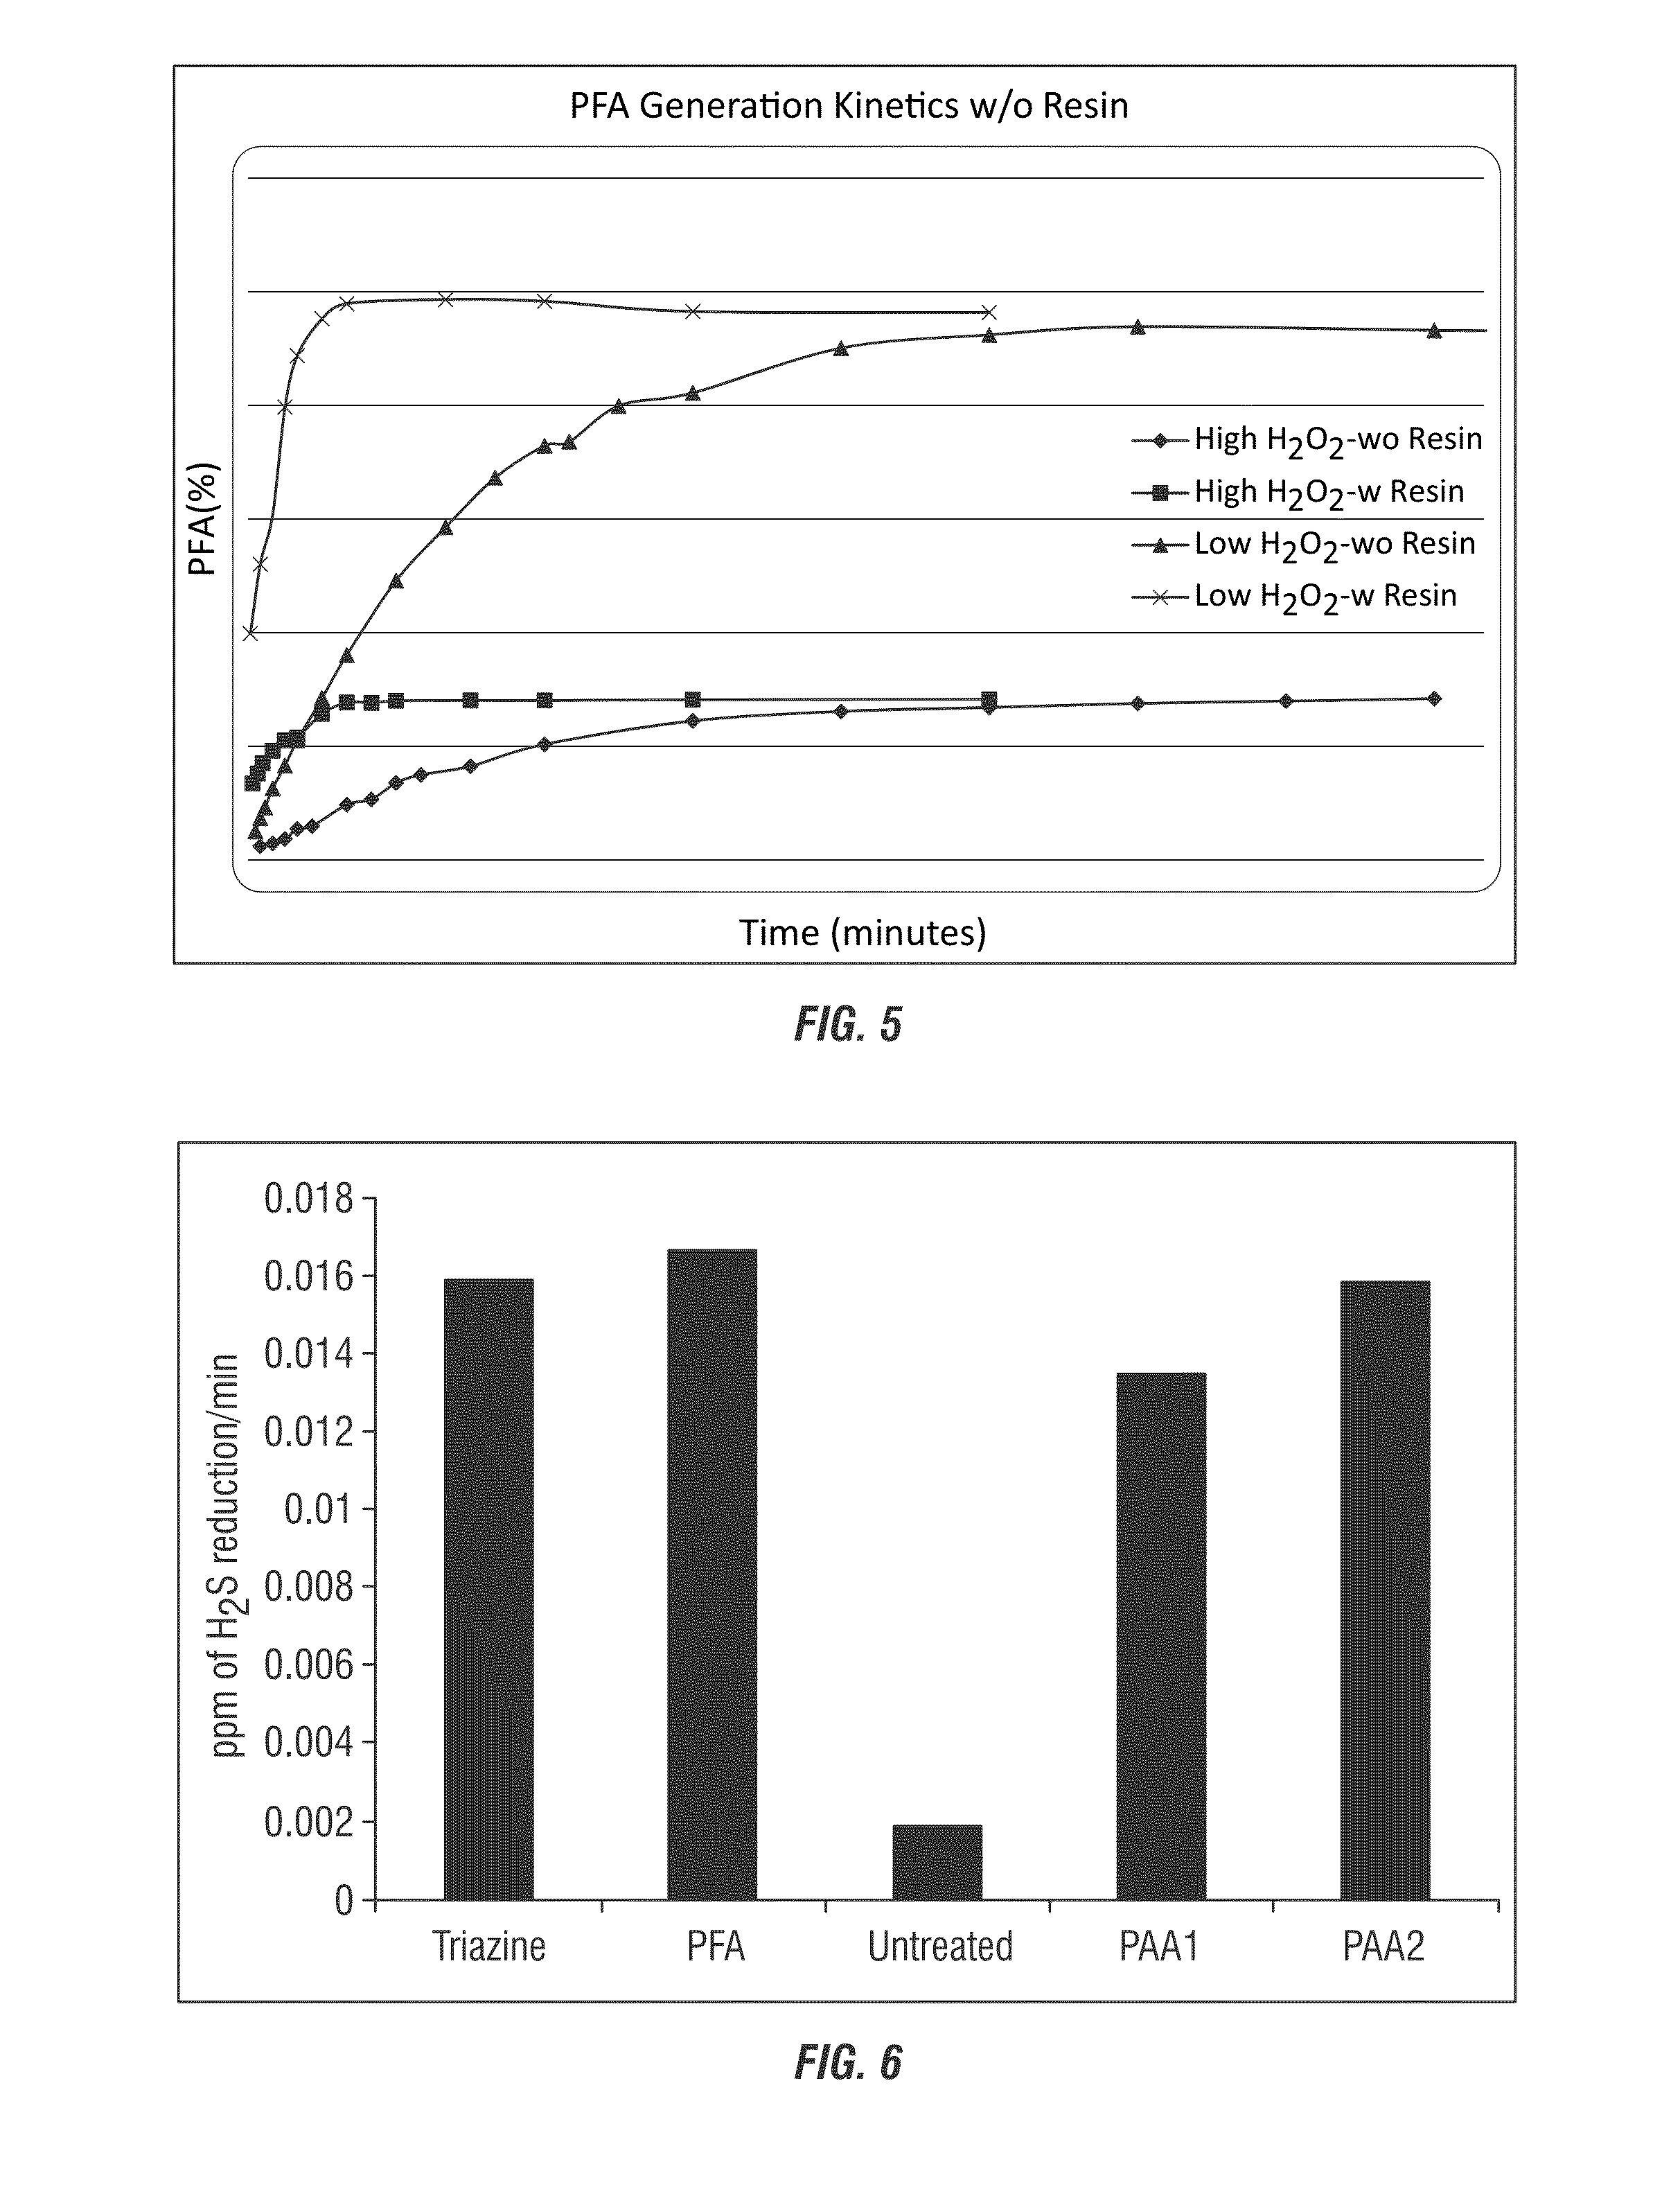 Methods for forming peroxyformic acid and uses thereof